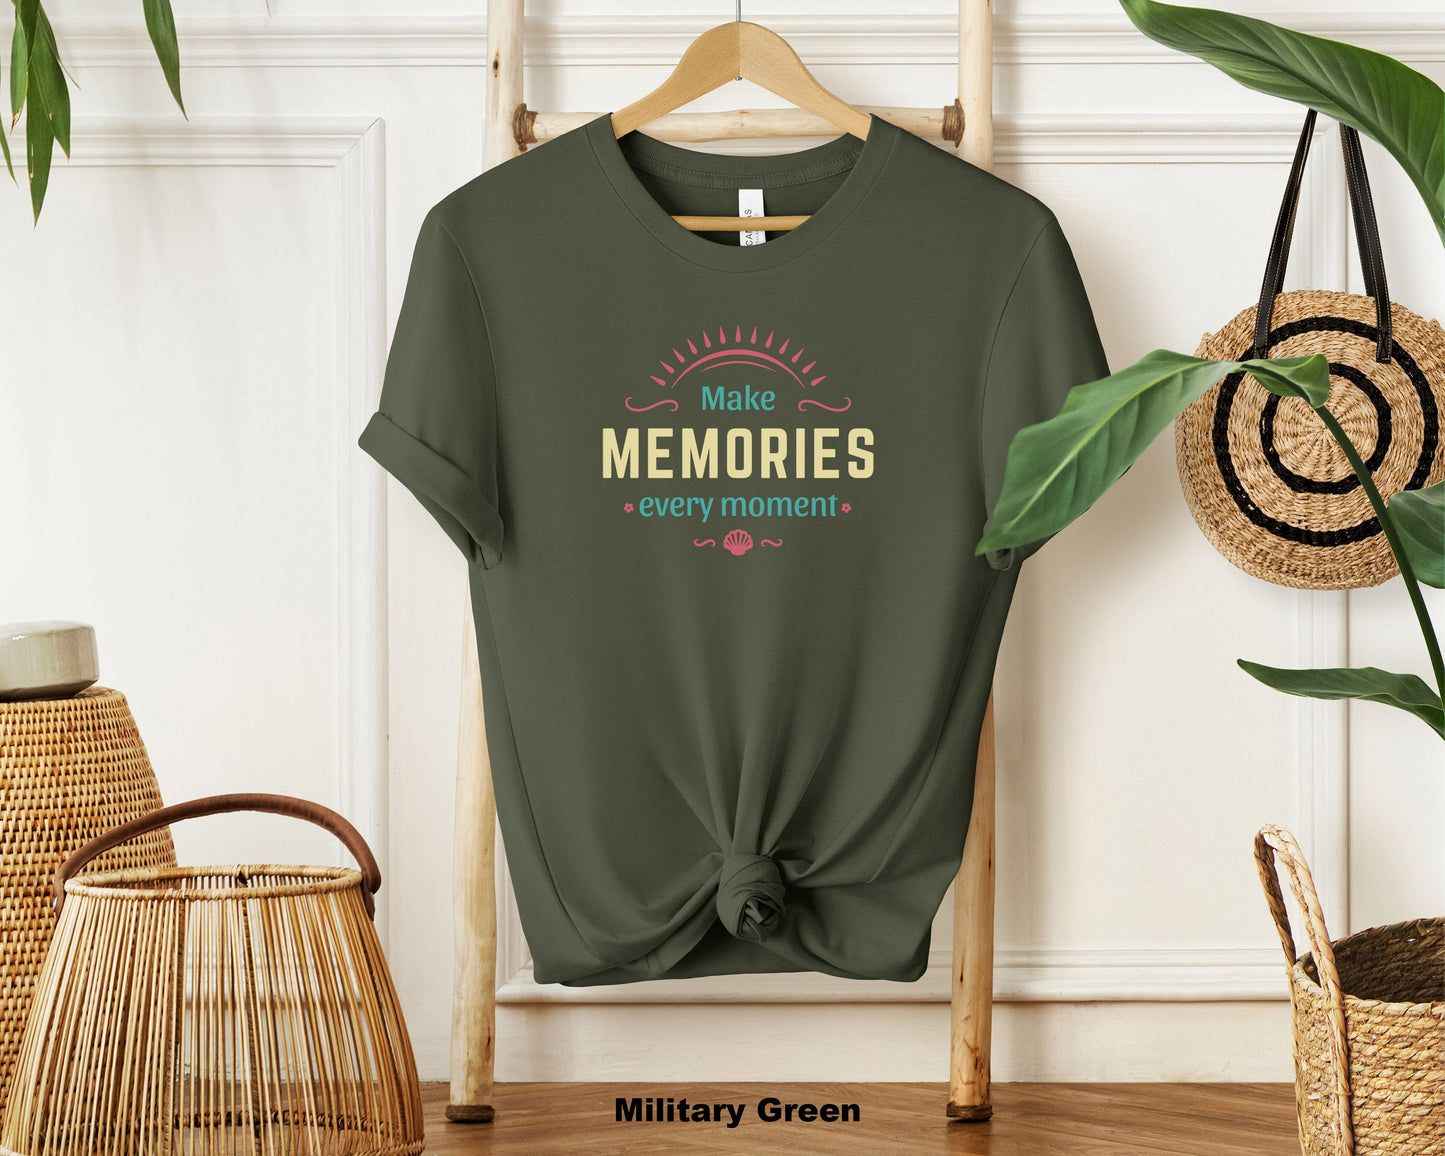 "Make Memories Every Moment Classic Unisex T-Shirt for Struggling Dreamers and Achievers"